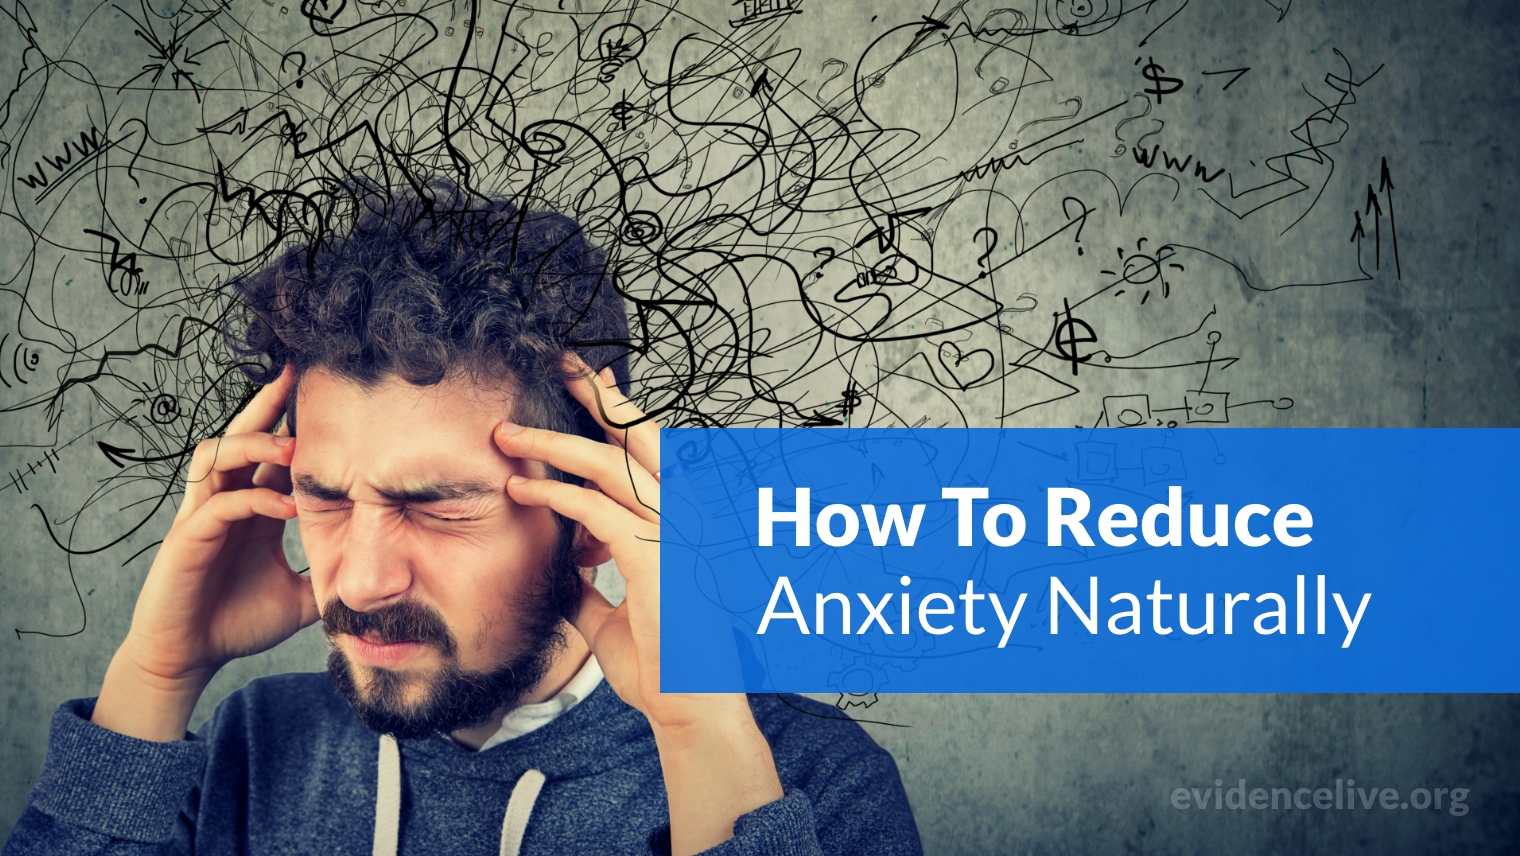 How To Reduce Anxiety Naturally